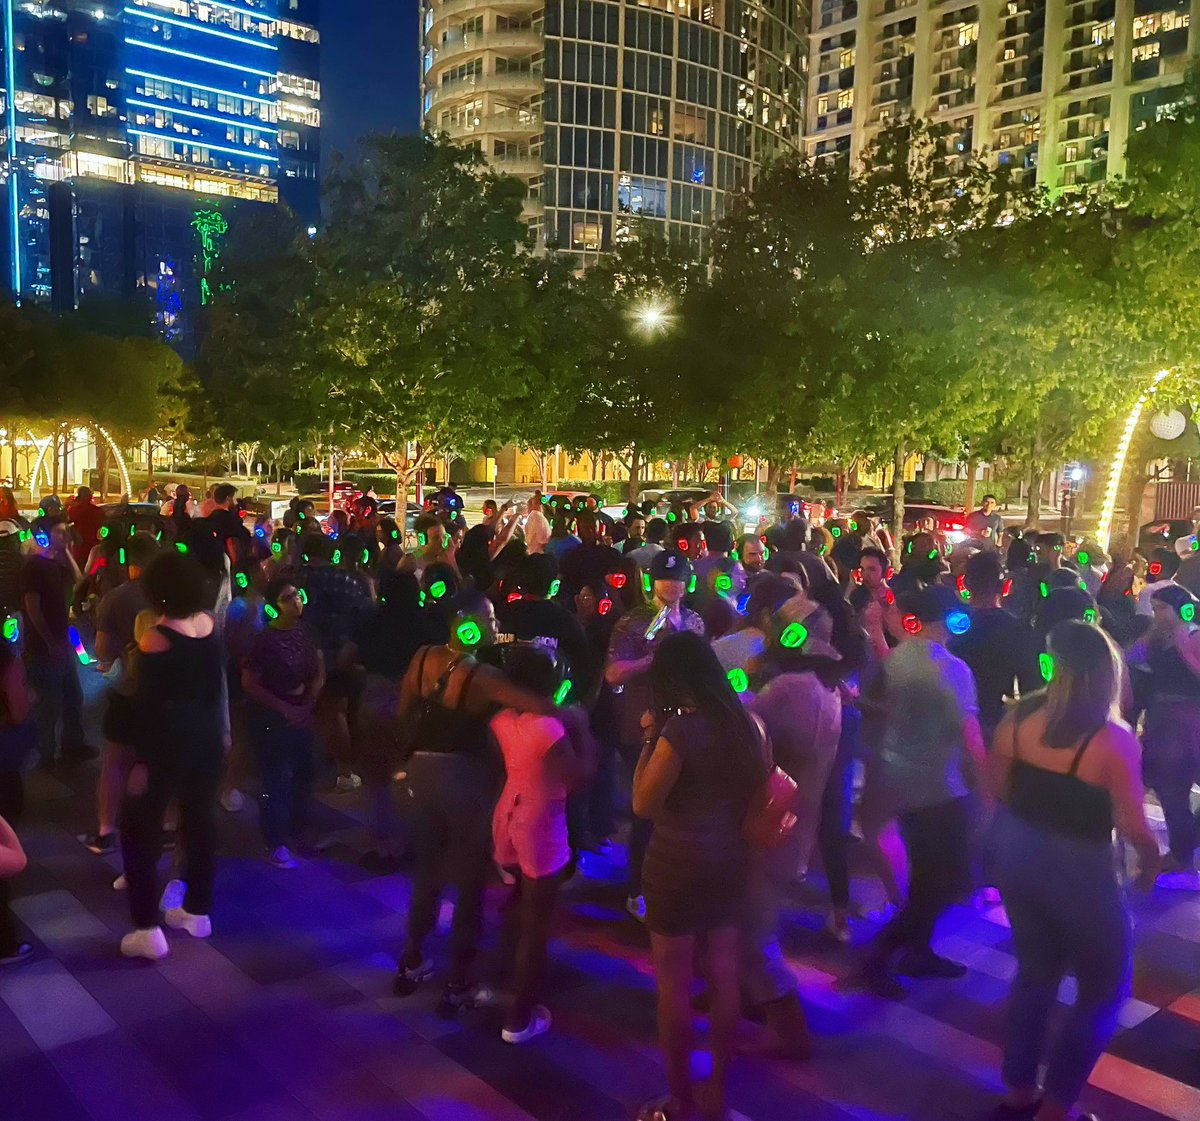 Dallasites101 Silent Disco Presented by C4 Energy Friday, August 4, 8 - 11 PM Purchased Ticket Required for Entry   Dance the night away with Dallasites101 at a silent disco party! Purchase tickets here eventbrite.com/e/silent-disco…